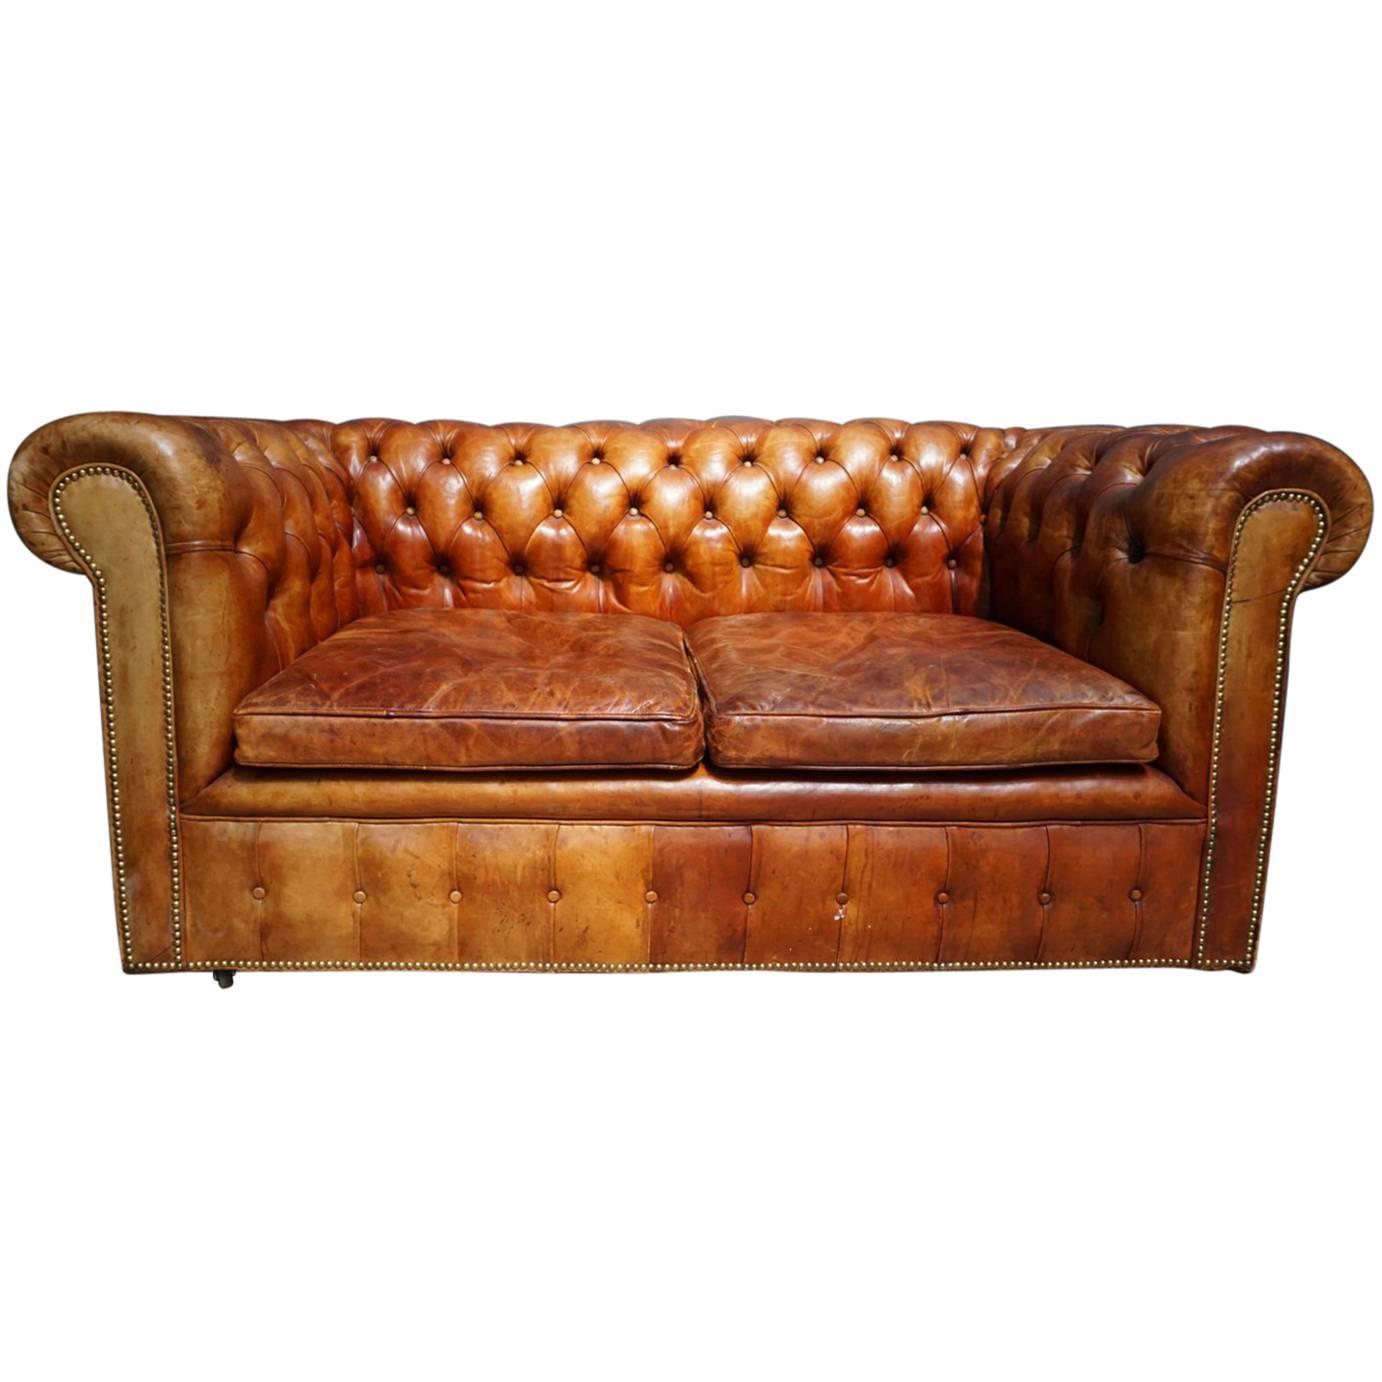 Vintage Midcentury Cognac Leather Two-Seat Chesterfield Sofa